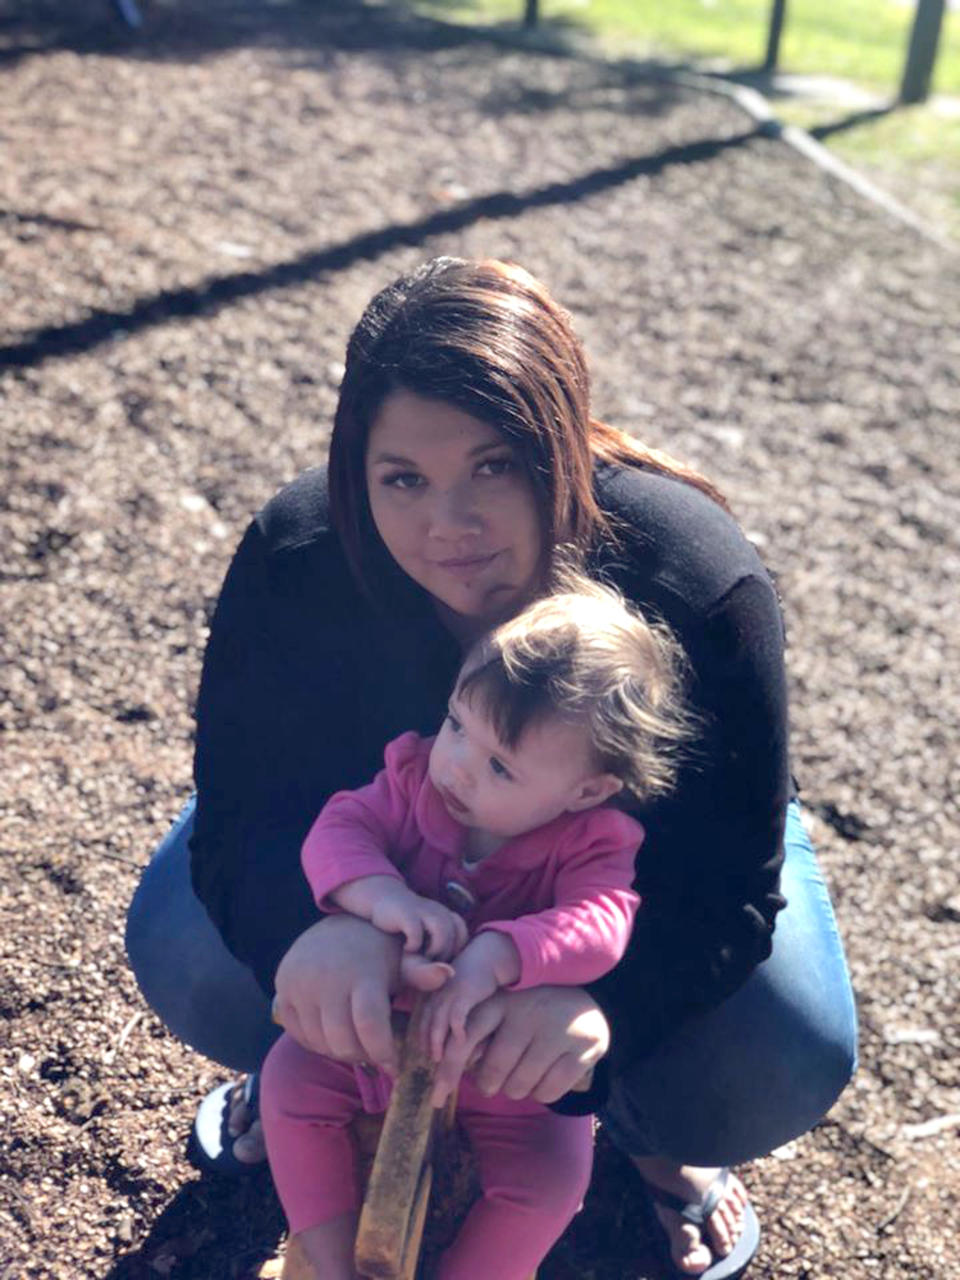 Pictured is Nikita Aldridge holding her young daughter in a park. 